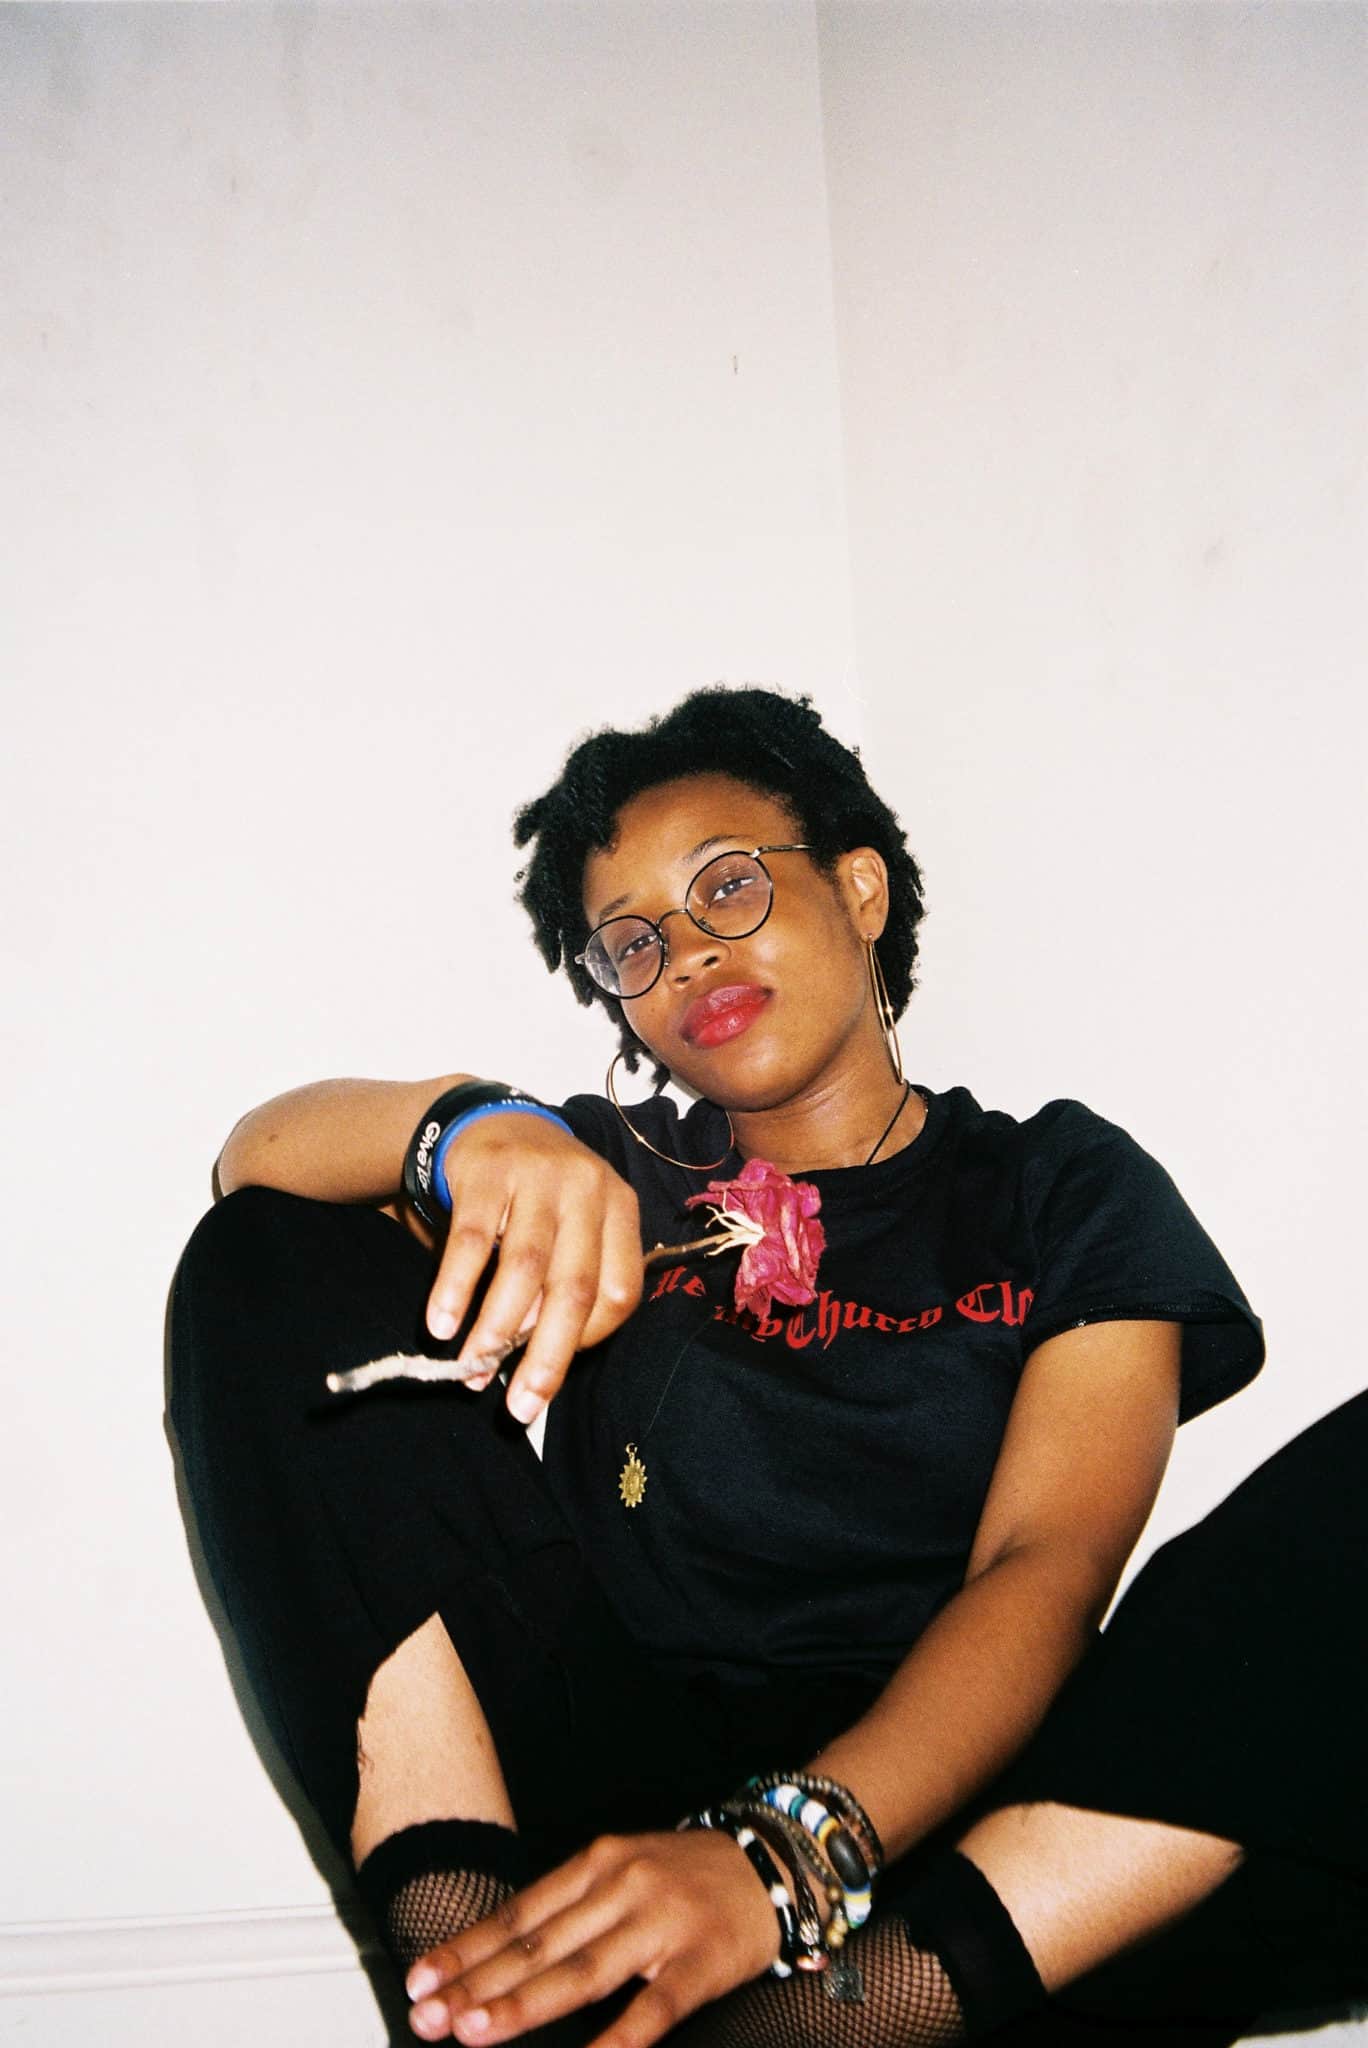 Lady Donli is putting love and light into the world, one song at a time